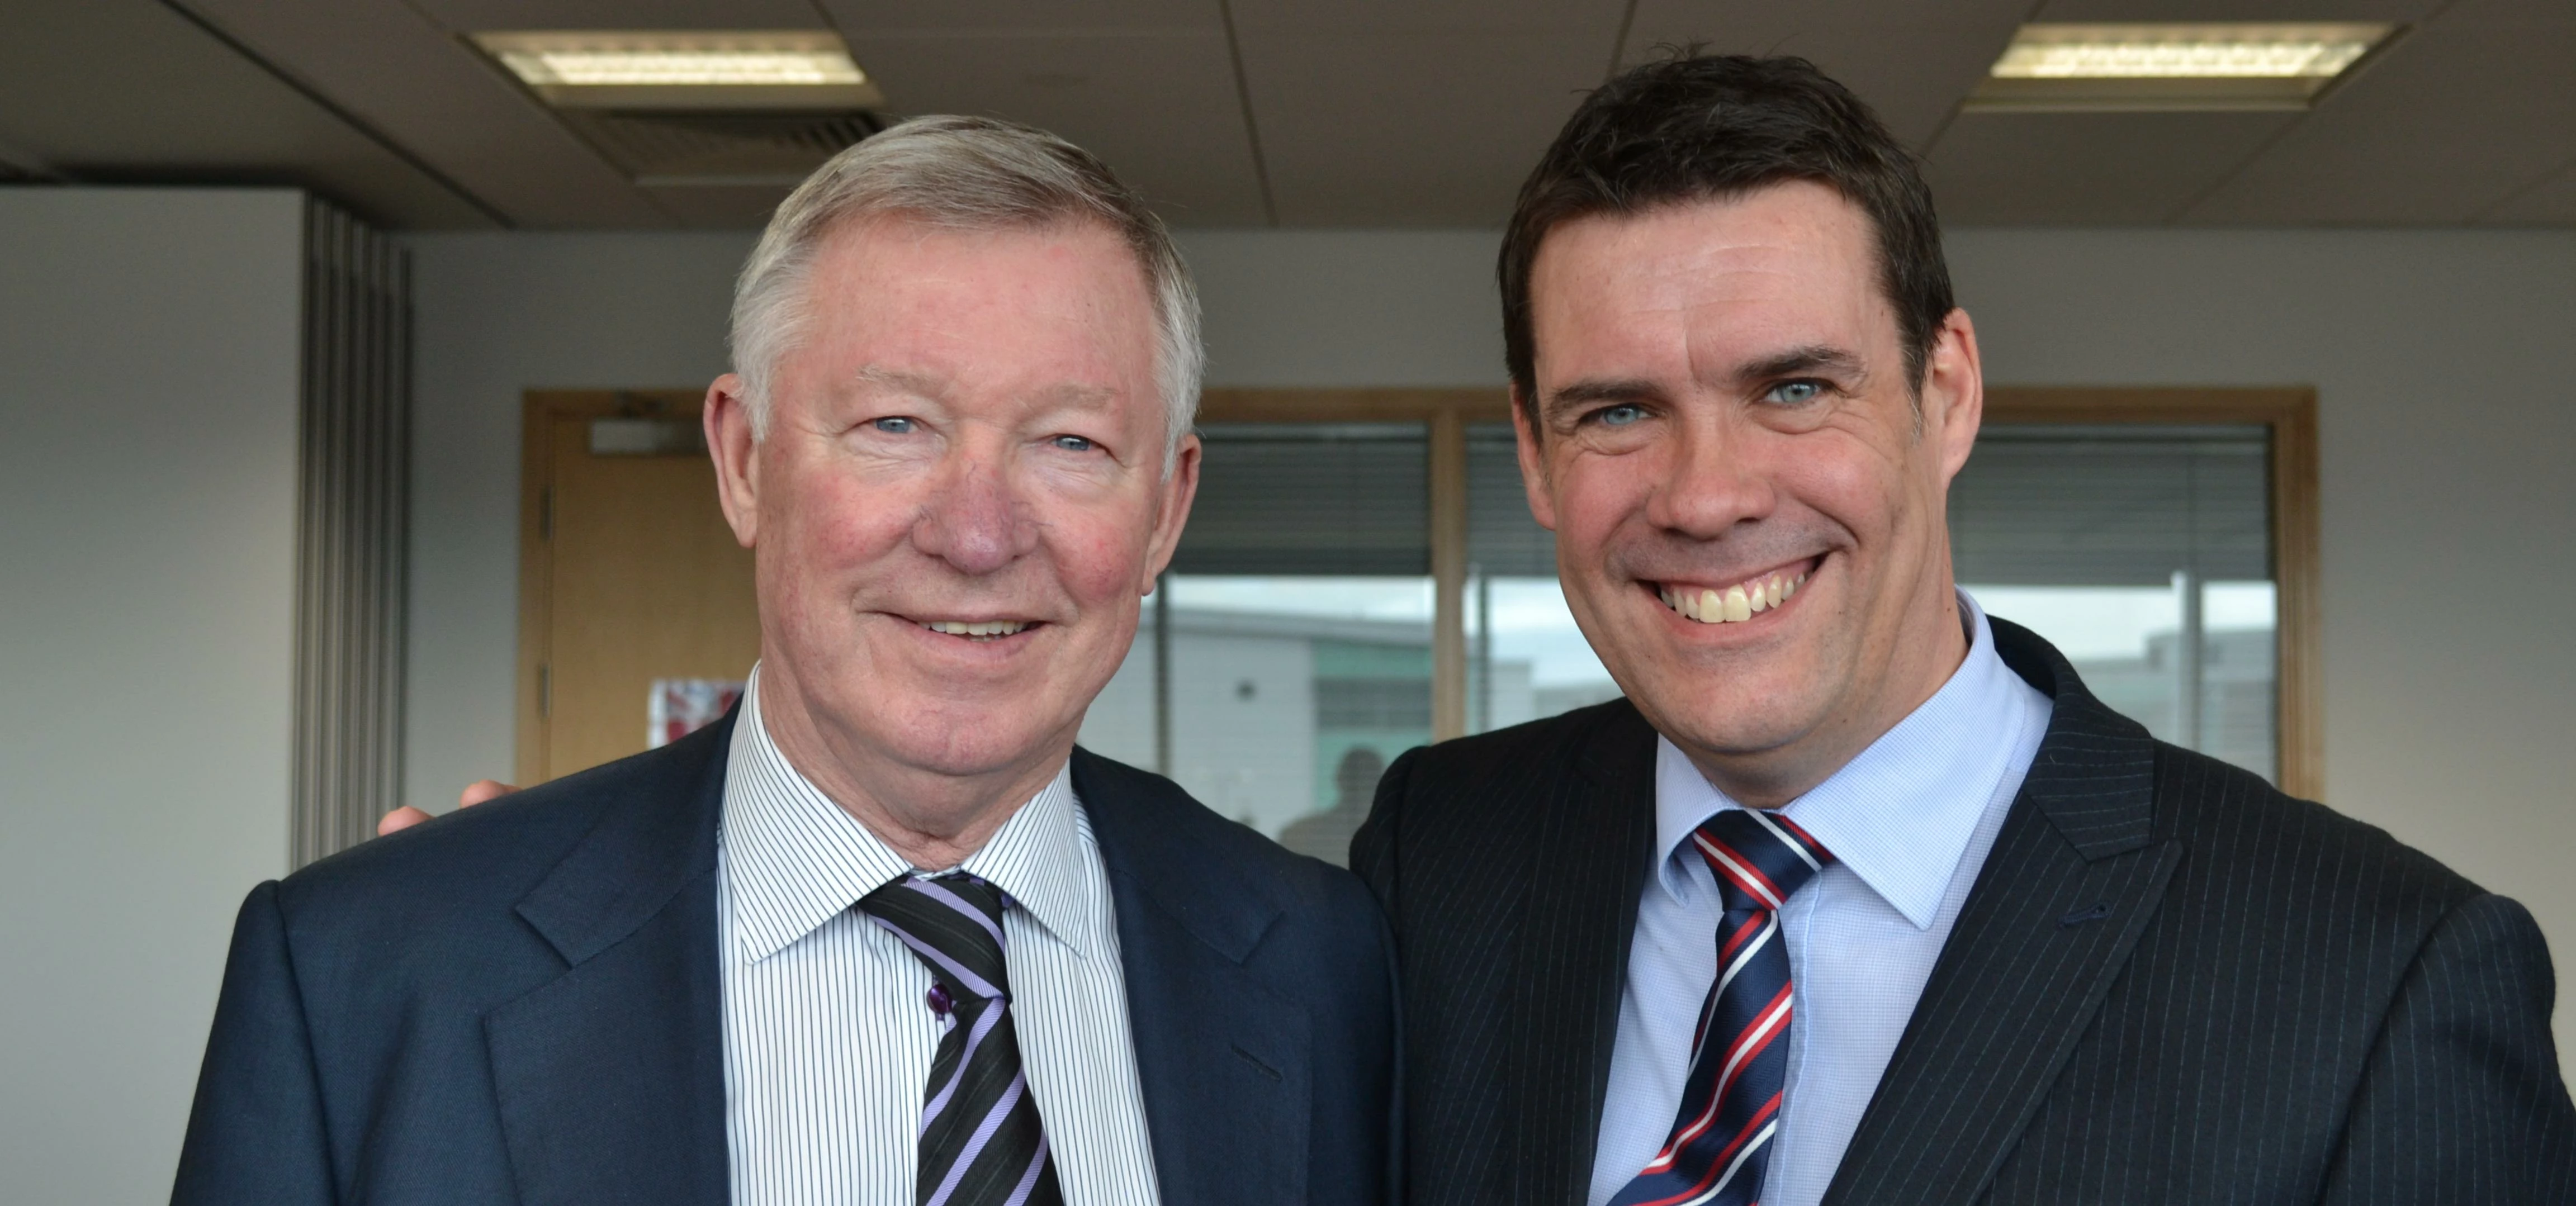 Sir Alex Ferguson, former Manchester United manager (left) and Ray Fletcher, director at Street Cran